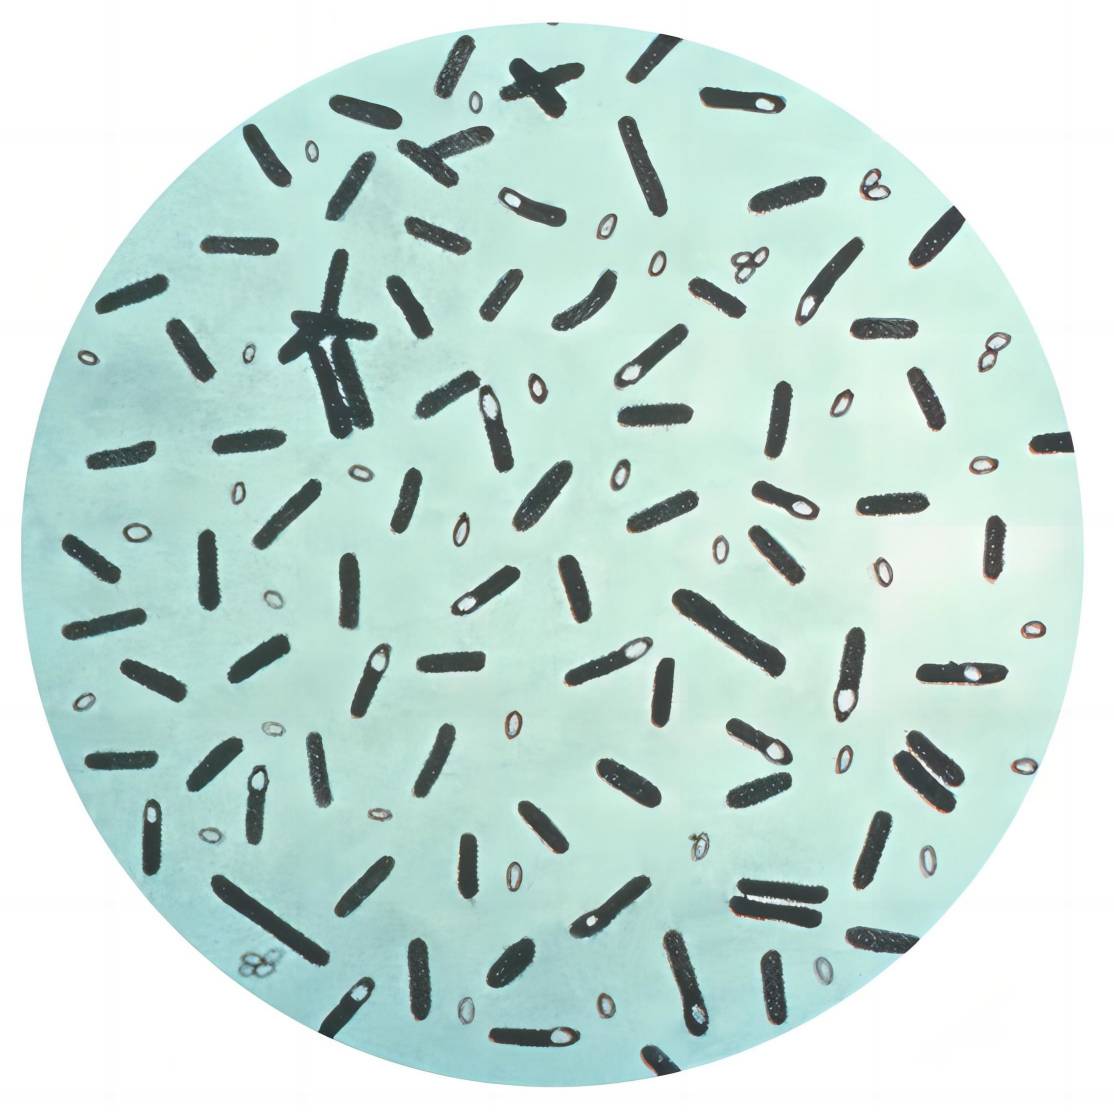 Fig. 1 The picture of Clostridium botulinum. （By Content Providers: CDC - This media comes from the Centers for Disease Control and Prevention's Public Health Image Library (PHIL), with identification number #2107. https://commons.wikimedia.org/wiki/File:Clostridium_botulinum_01.png)